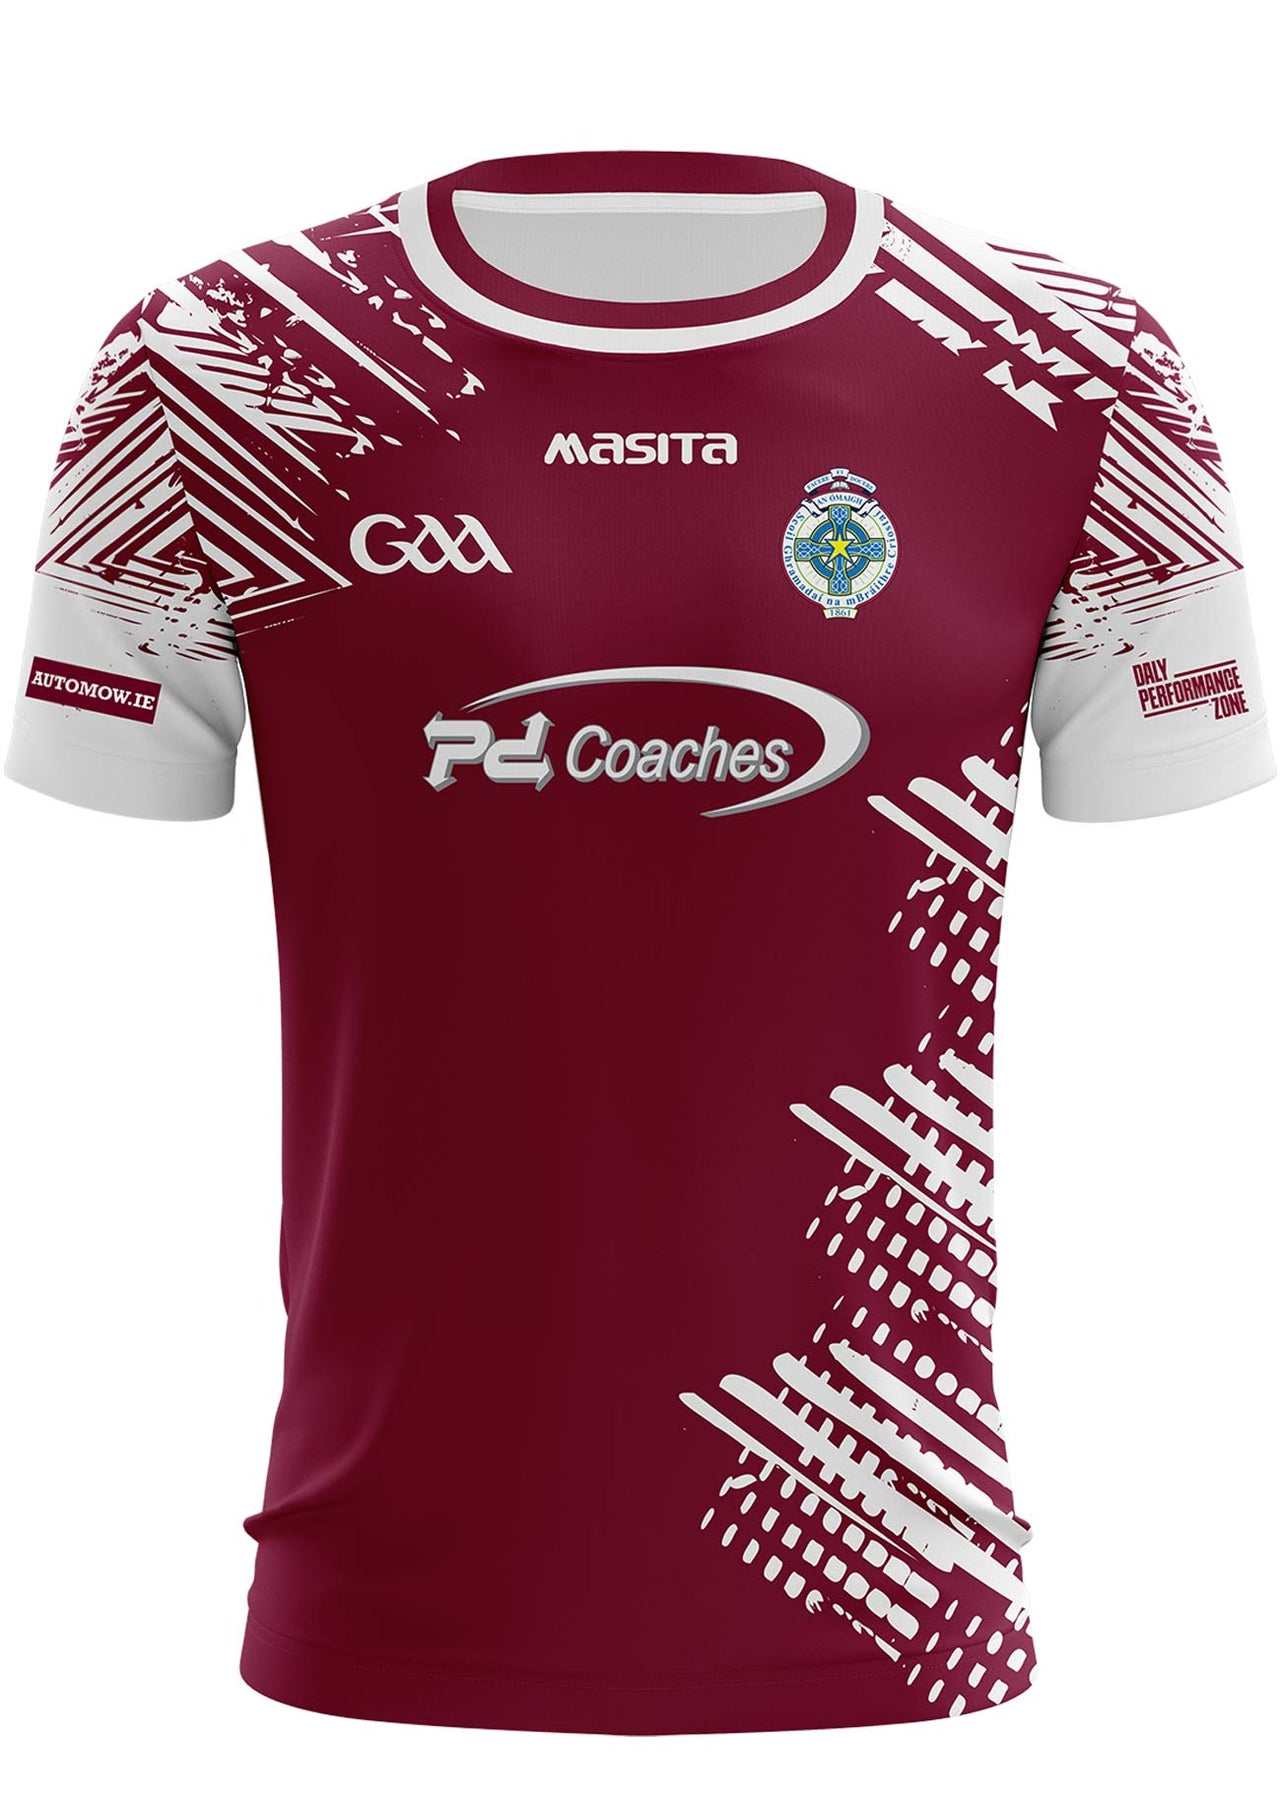 Omagh CBS Home Jersey Kids